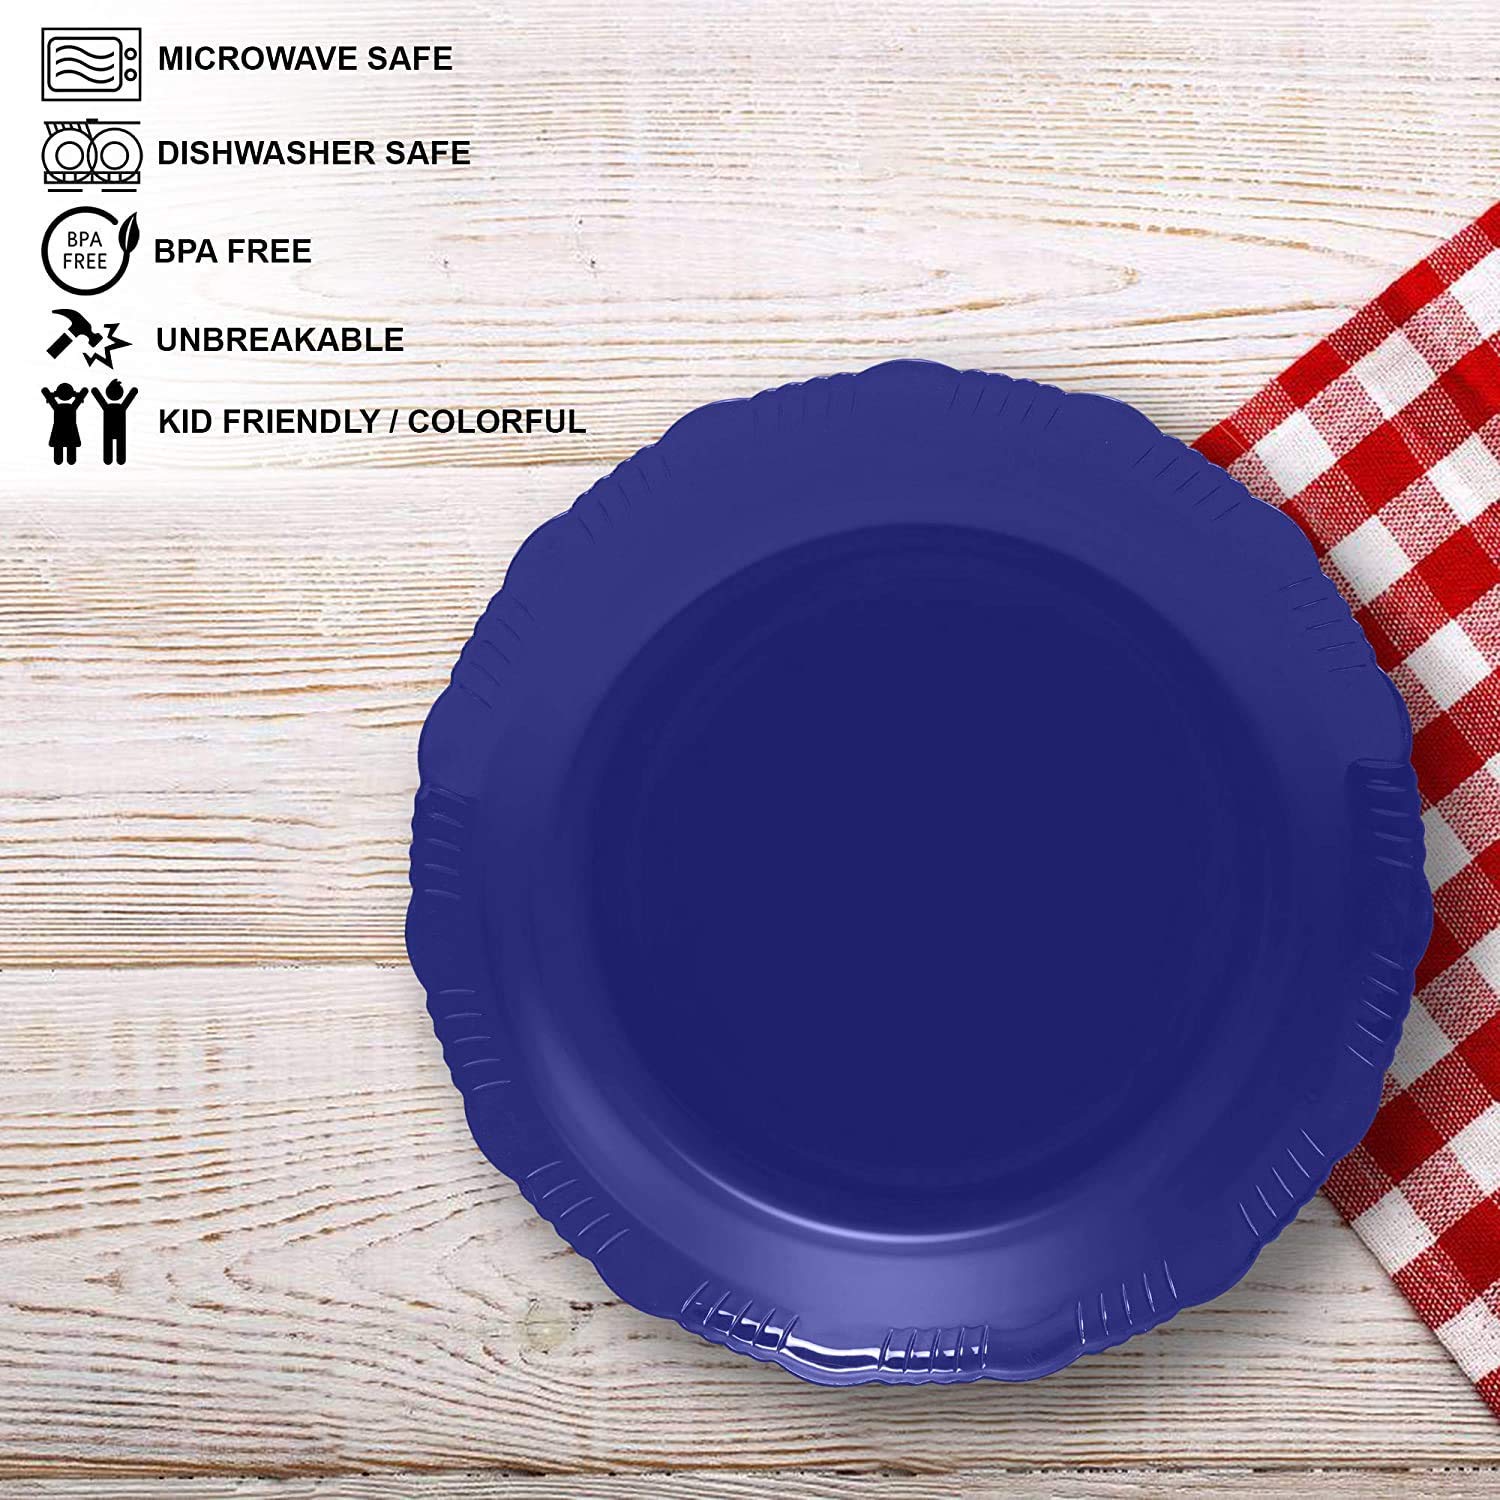 Cutting EDGE Round Colorful Set of Dinner Plates for Families, Daily Use, Parties, Unbreakable, Kid Friendly, Microwave Safe, Dishwasher Safe - Dark Blue (Set of 4)